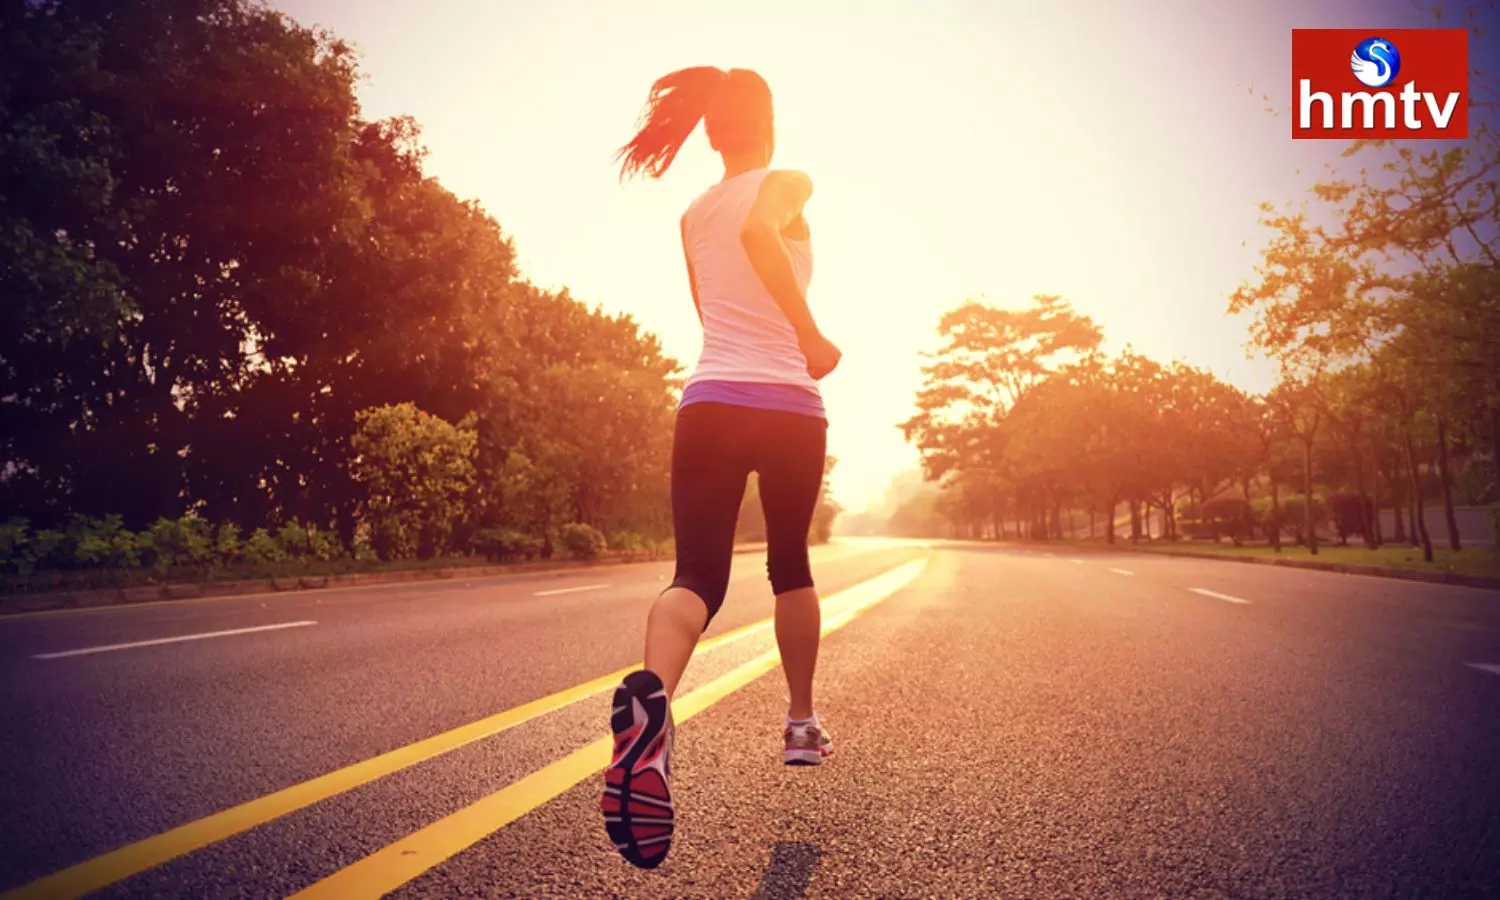 Pay special attention to these things while running otherwise you will get injured